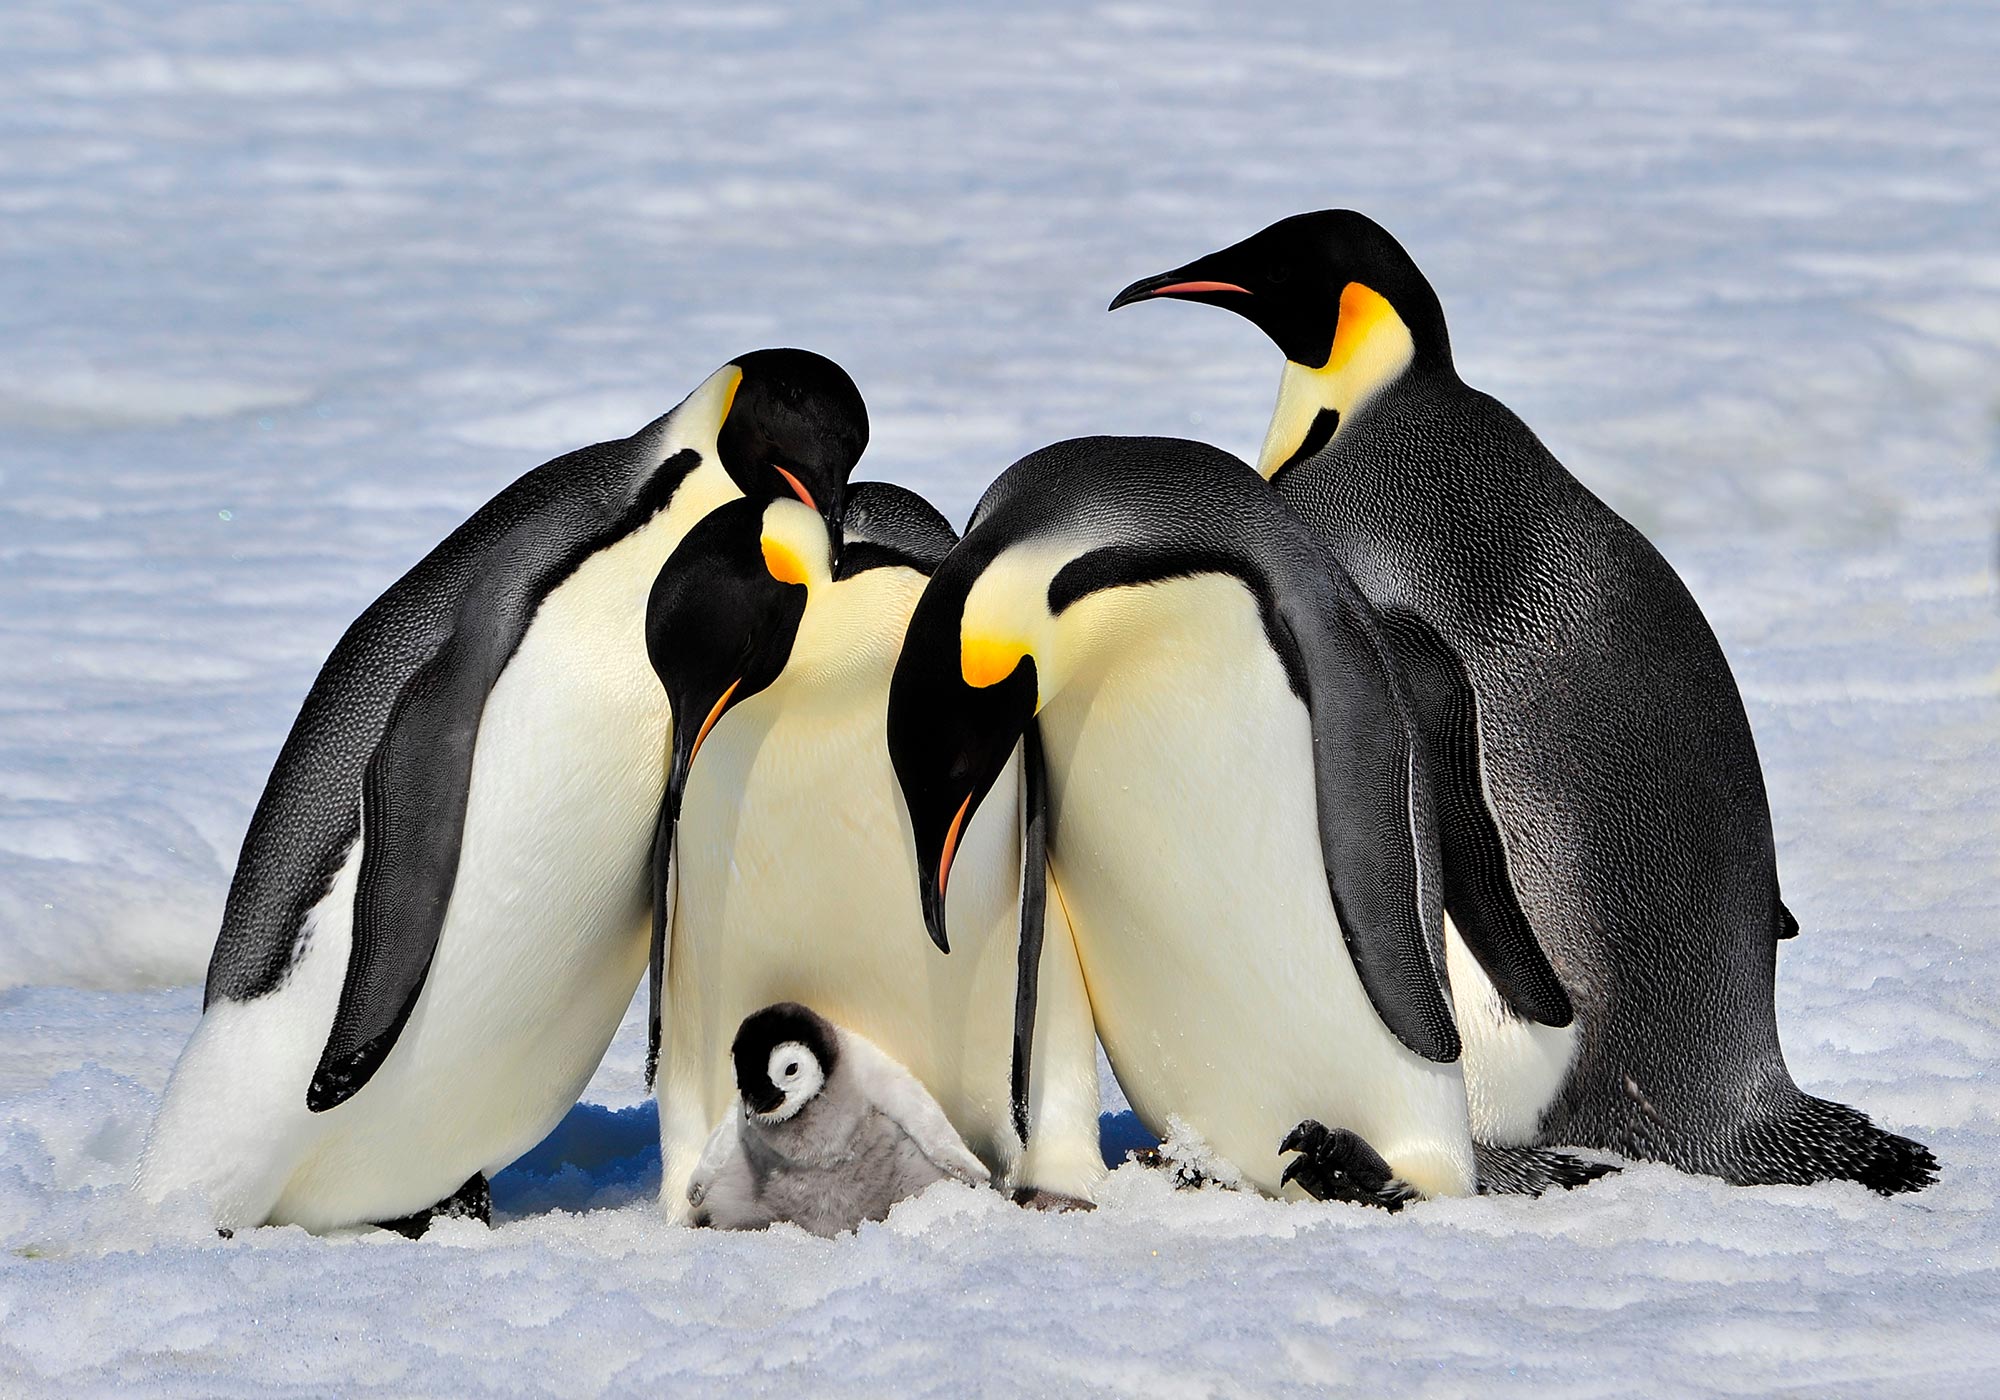 Emperor Penguins Are Threatened – Study Recommends Special 